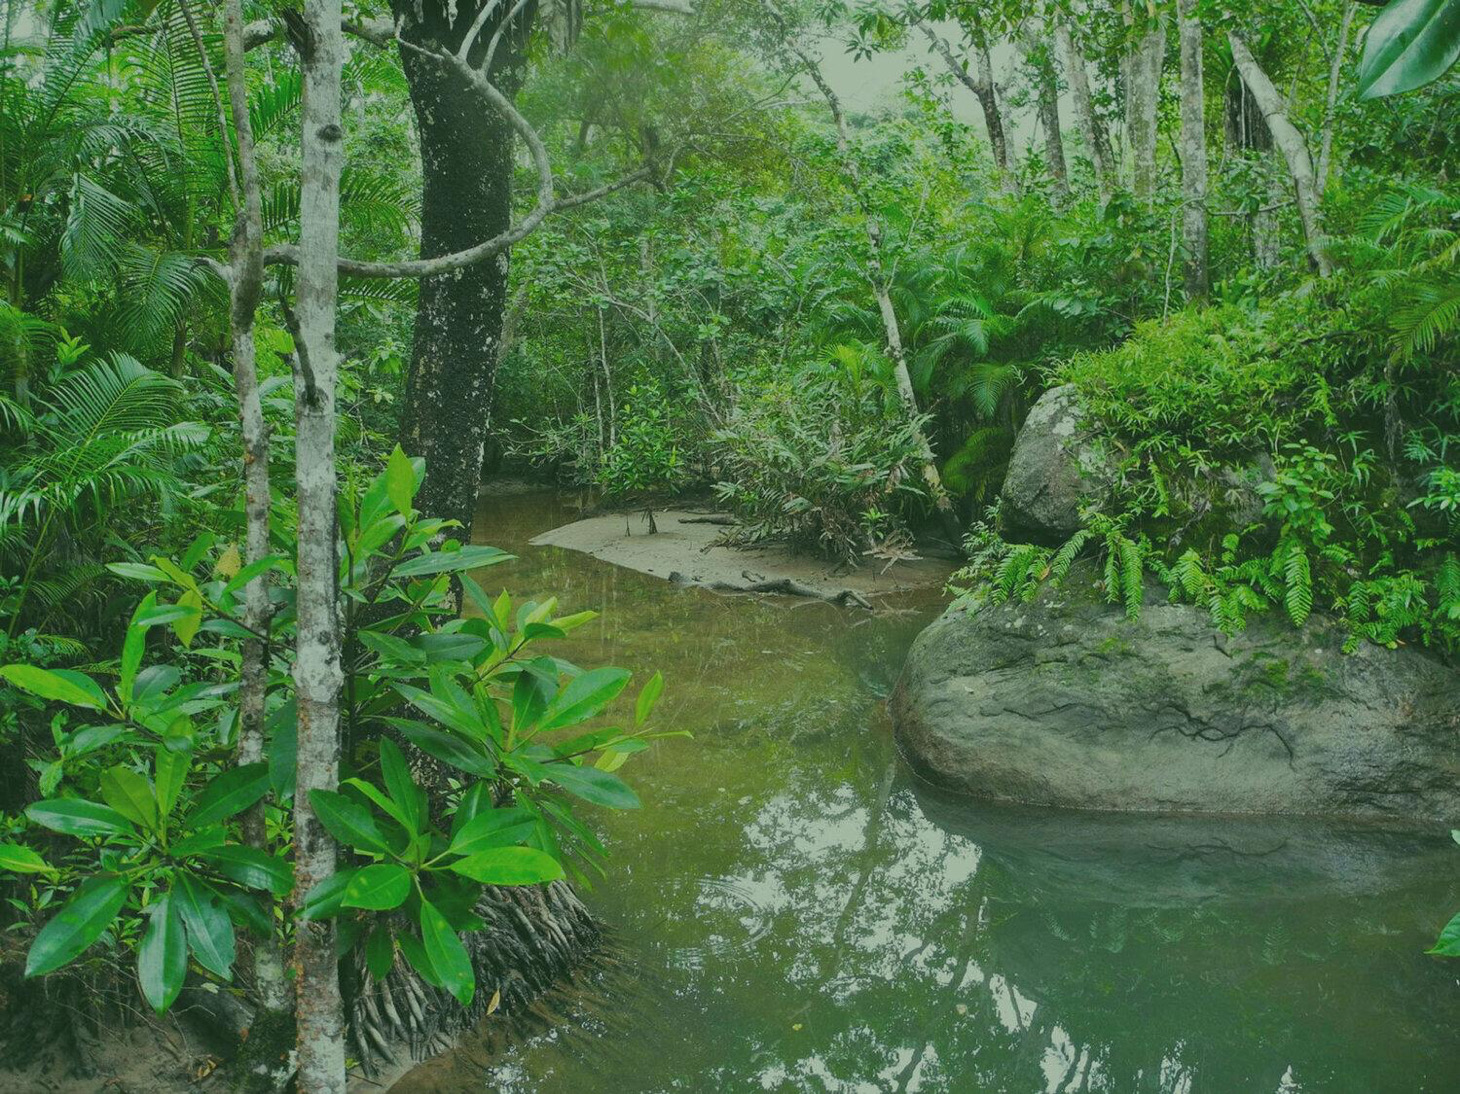 A water body flowing through a forest.